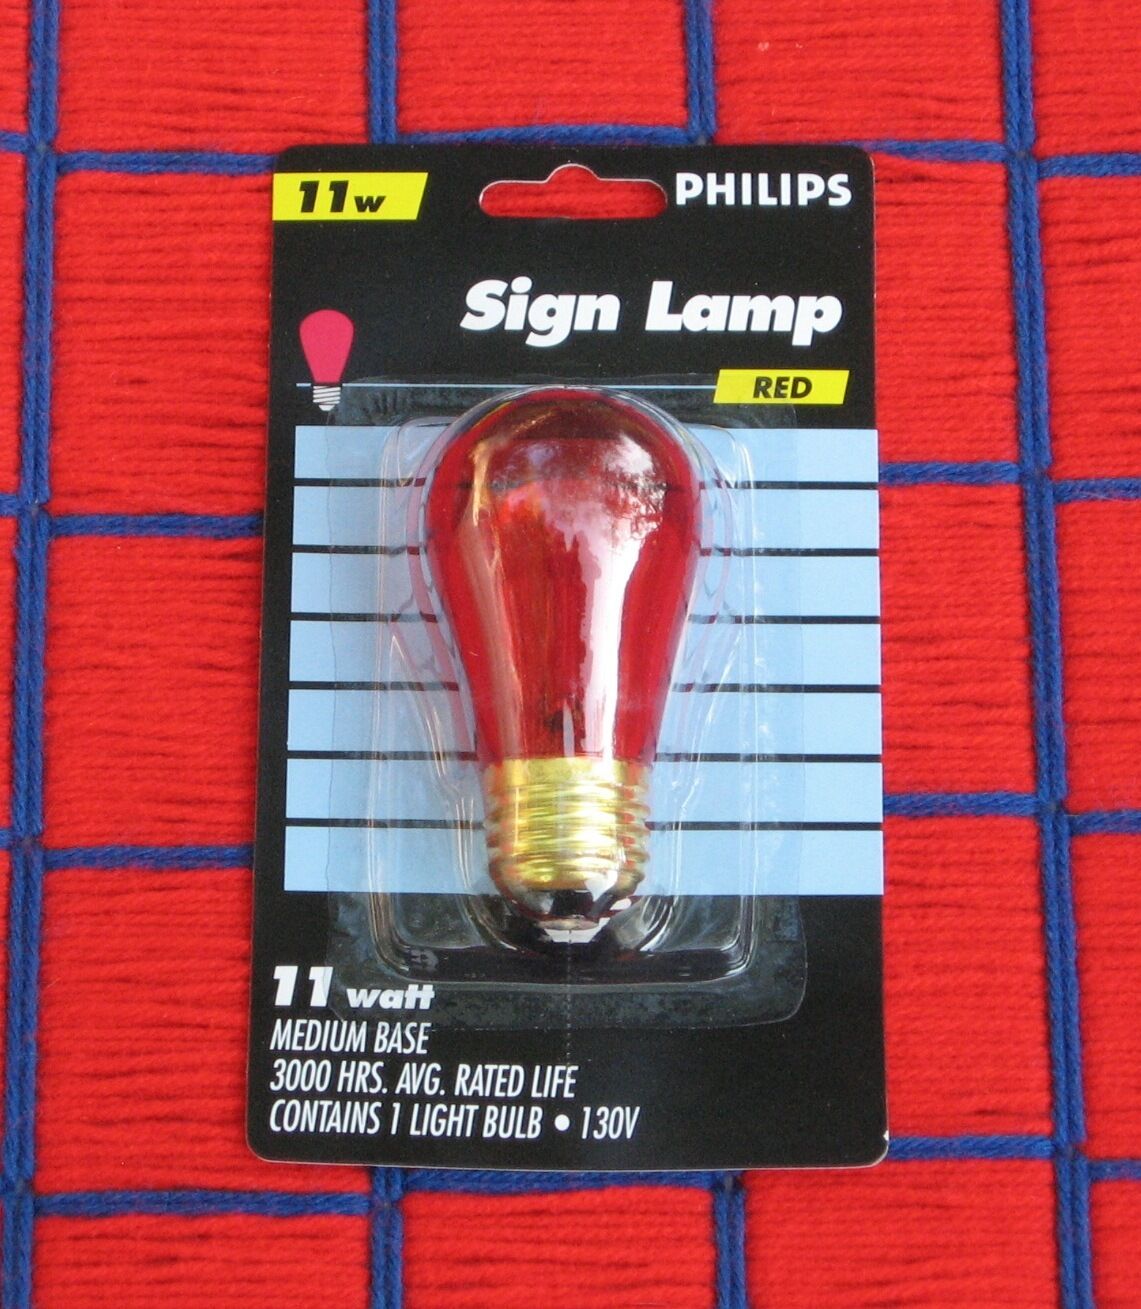 25new S14 RED transparent Philips outdoor sign 11w string 11S14 LIGHT BULB 130v 